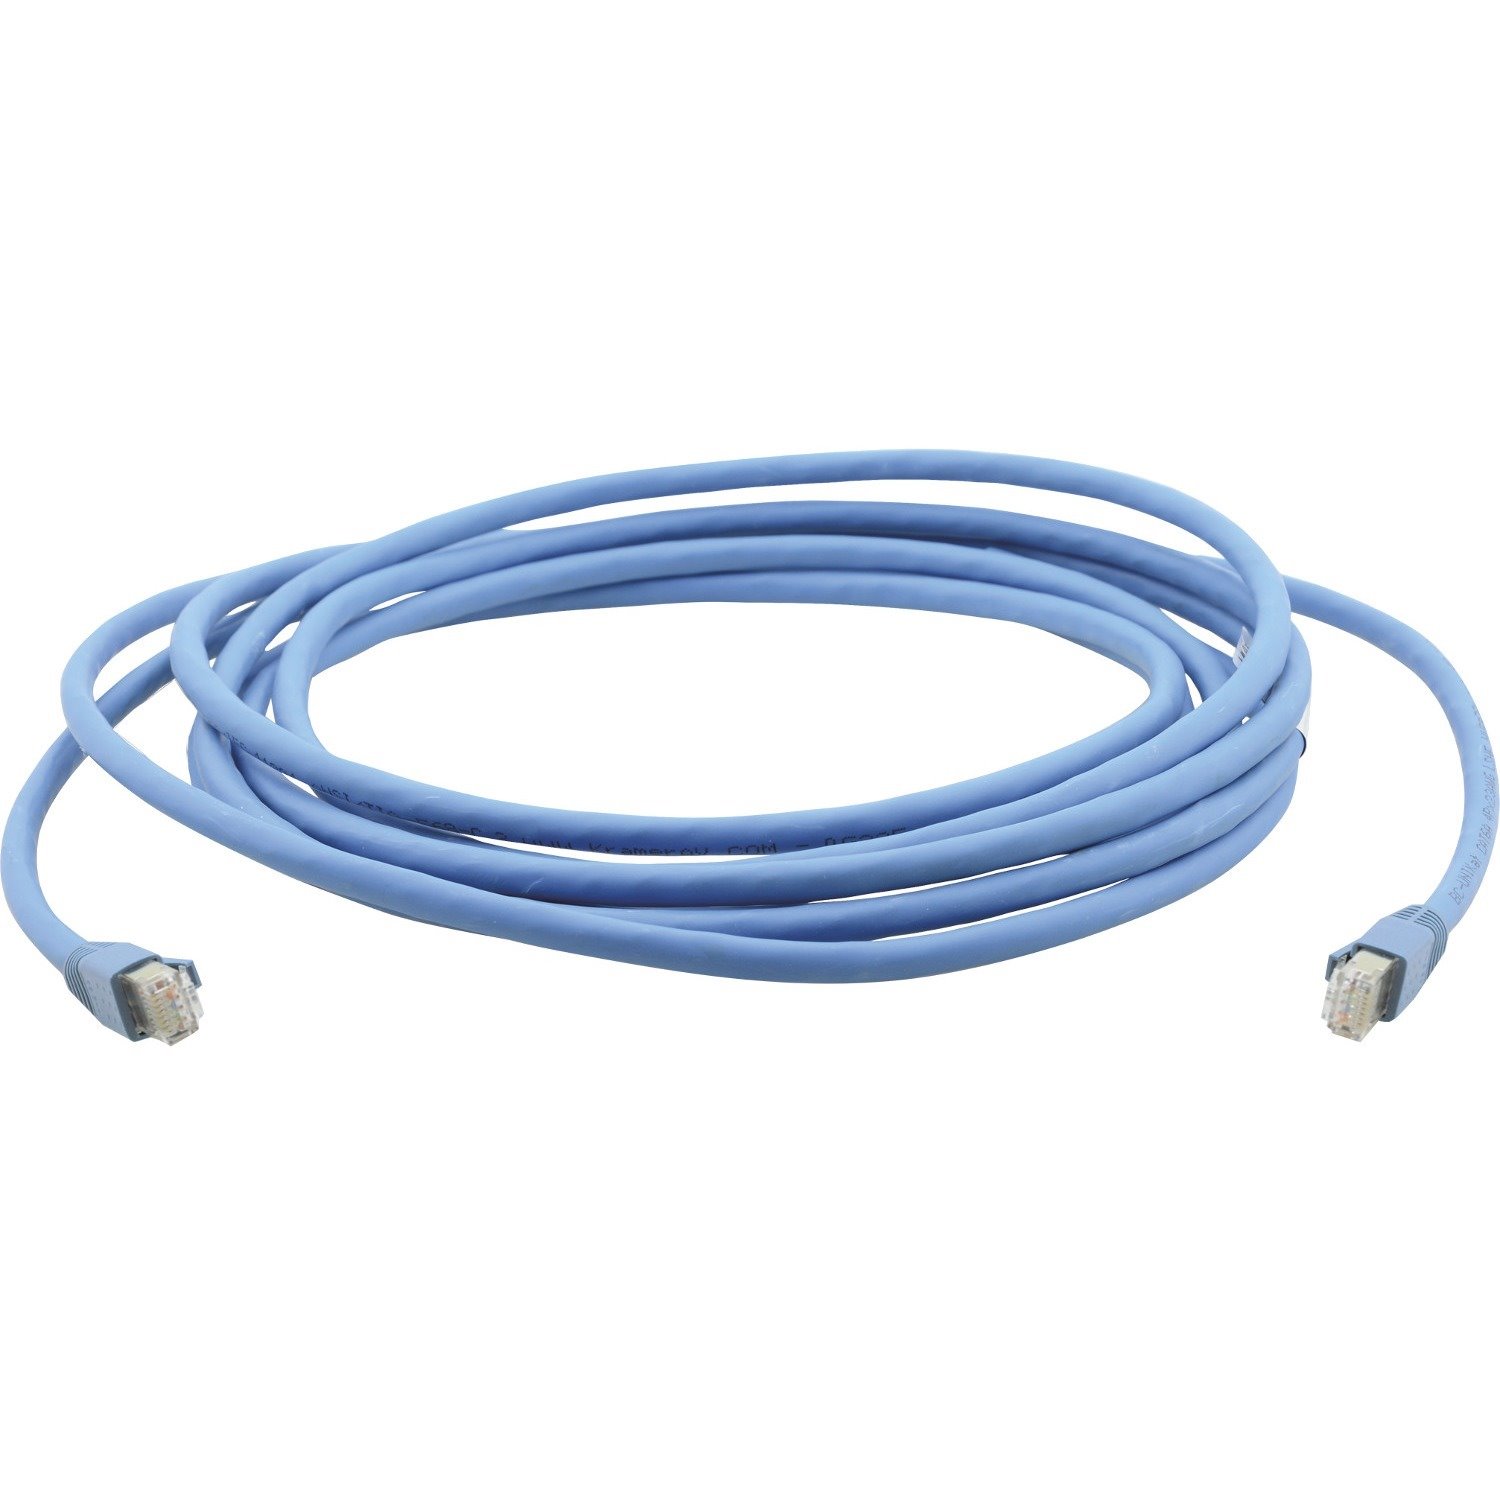 Kramer C-UNIKAT-50 15.24 m Category 6a Network Cable for Network Device, Transmitter, Receiver